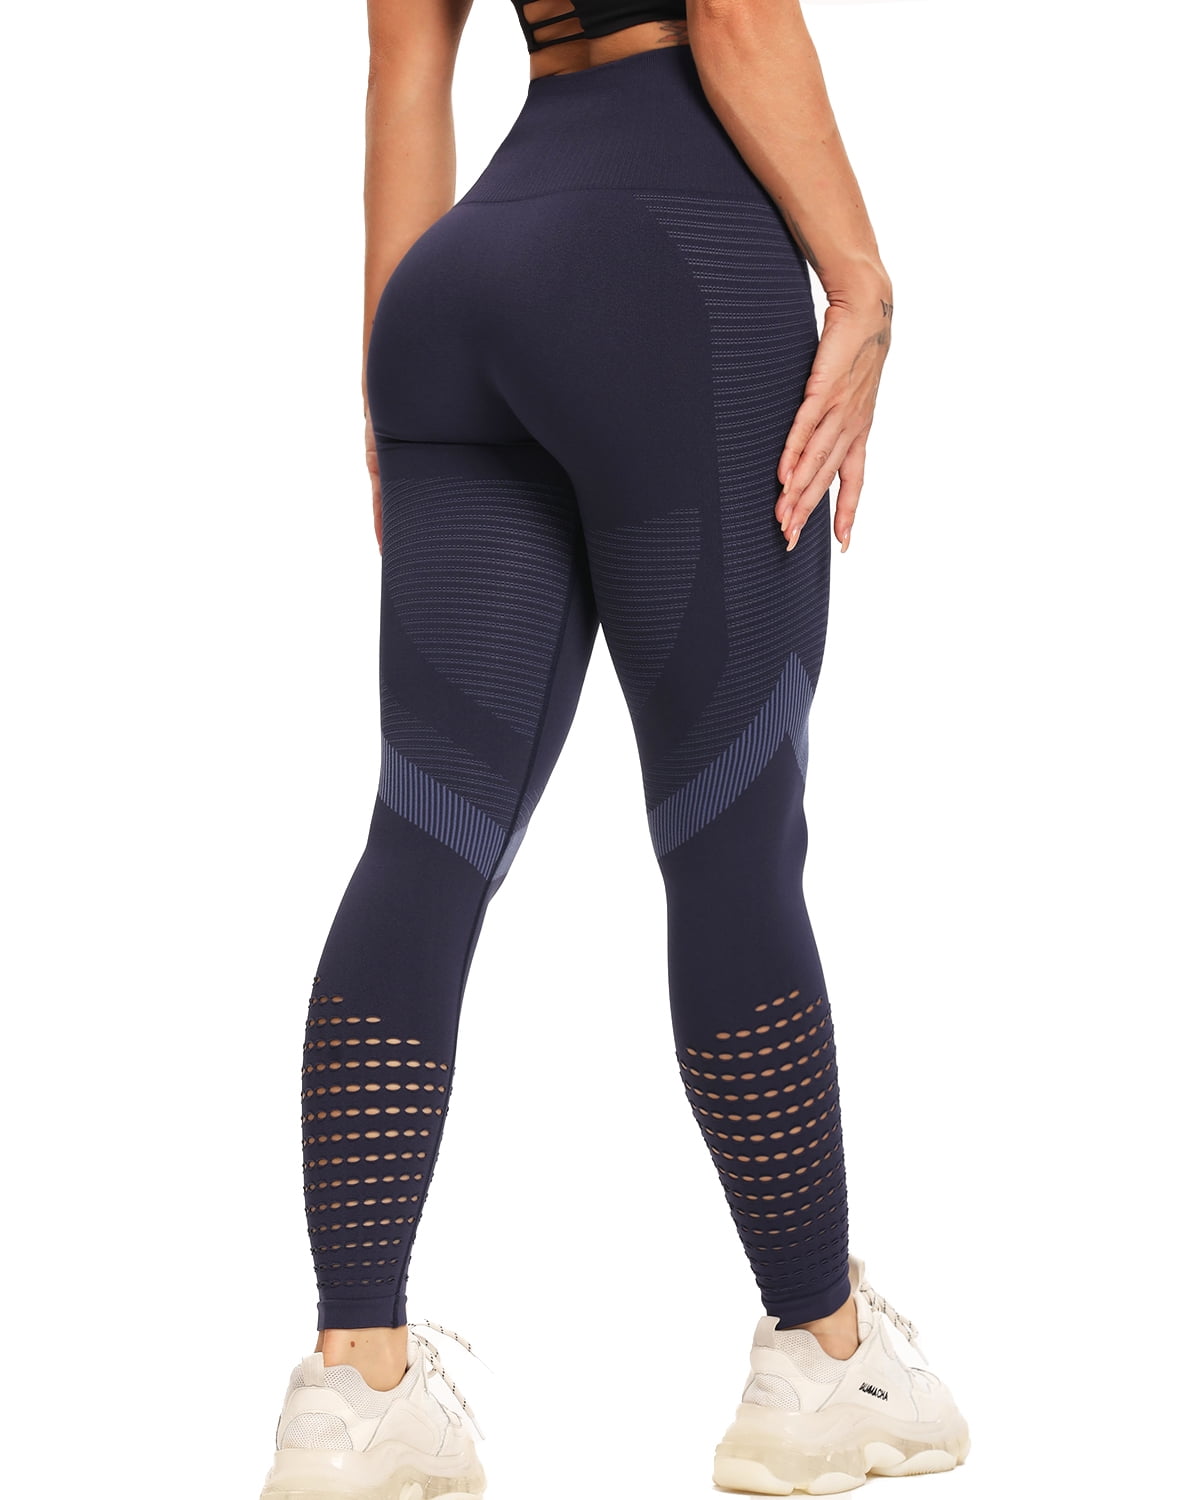 Compression workout tights